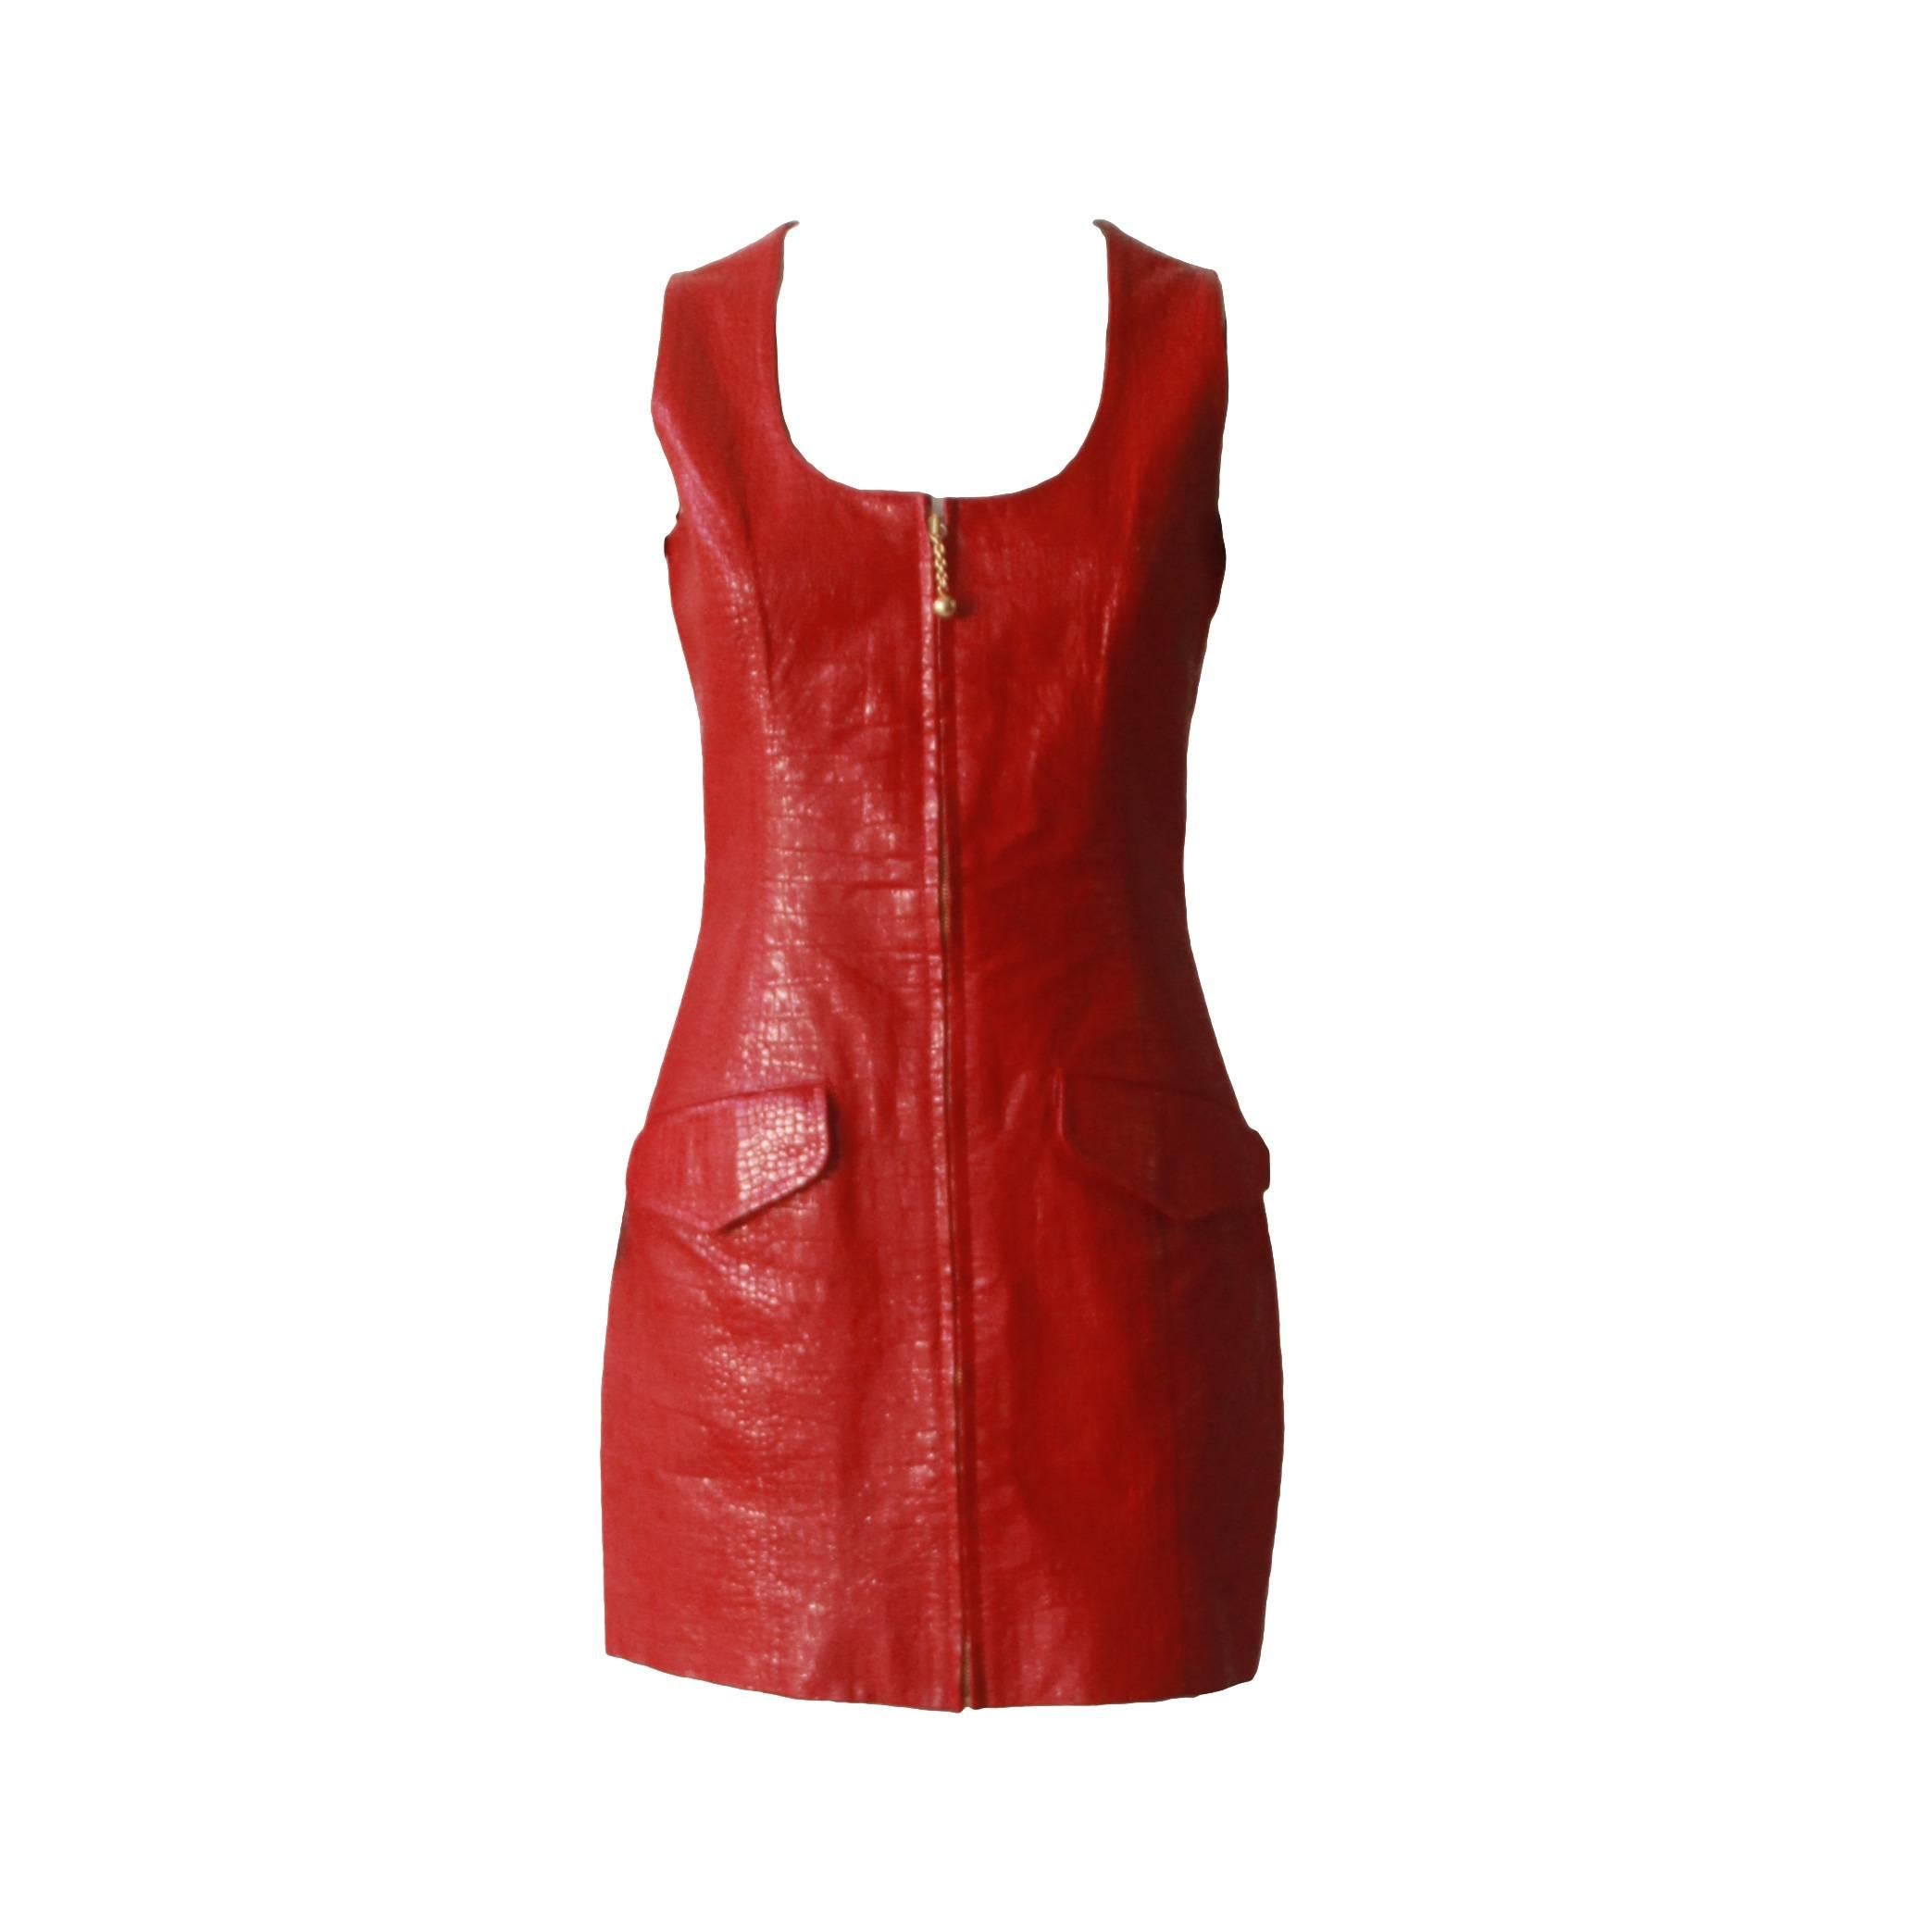 Mario Valentino Leather Dress Fall 1992 For Sale